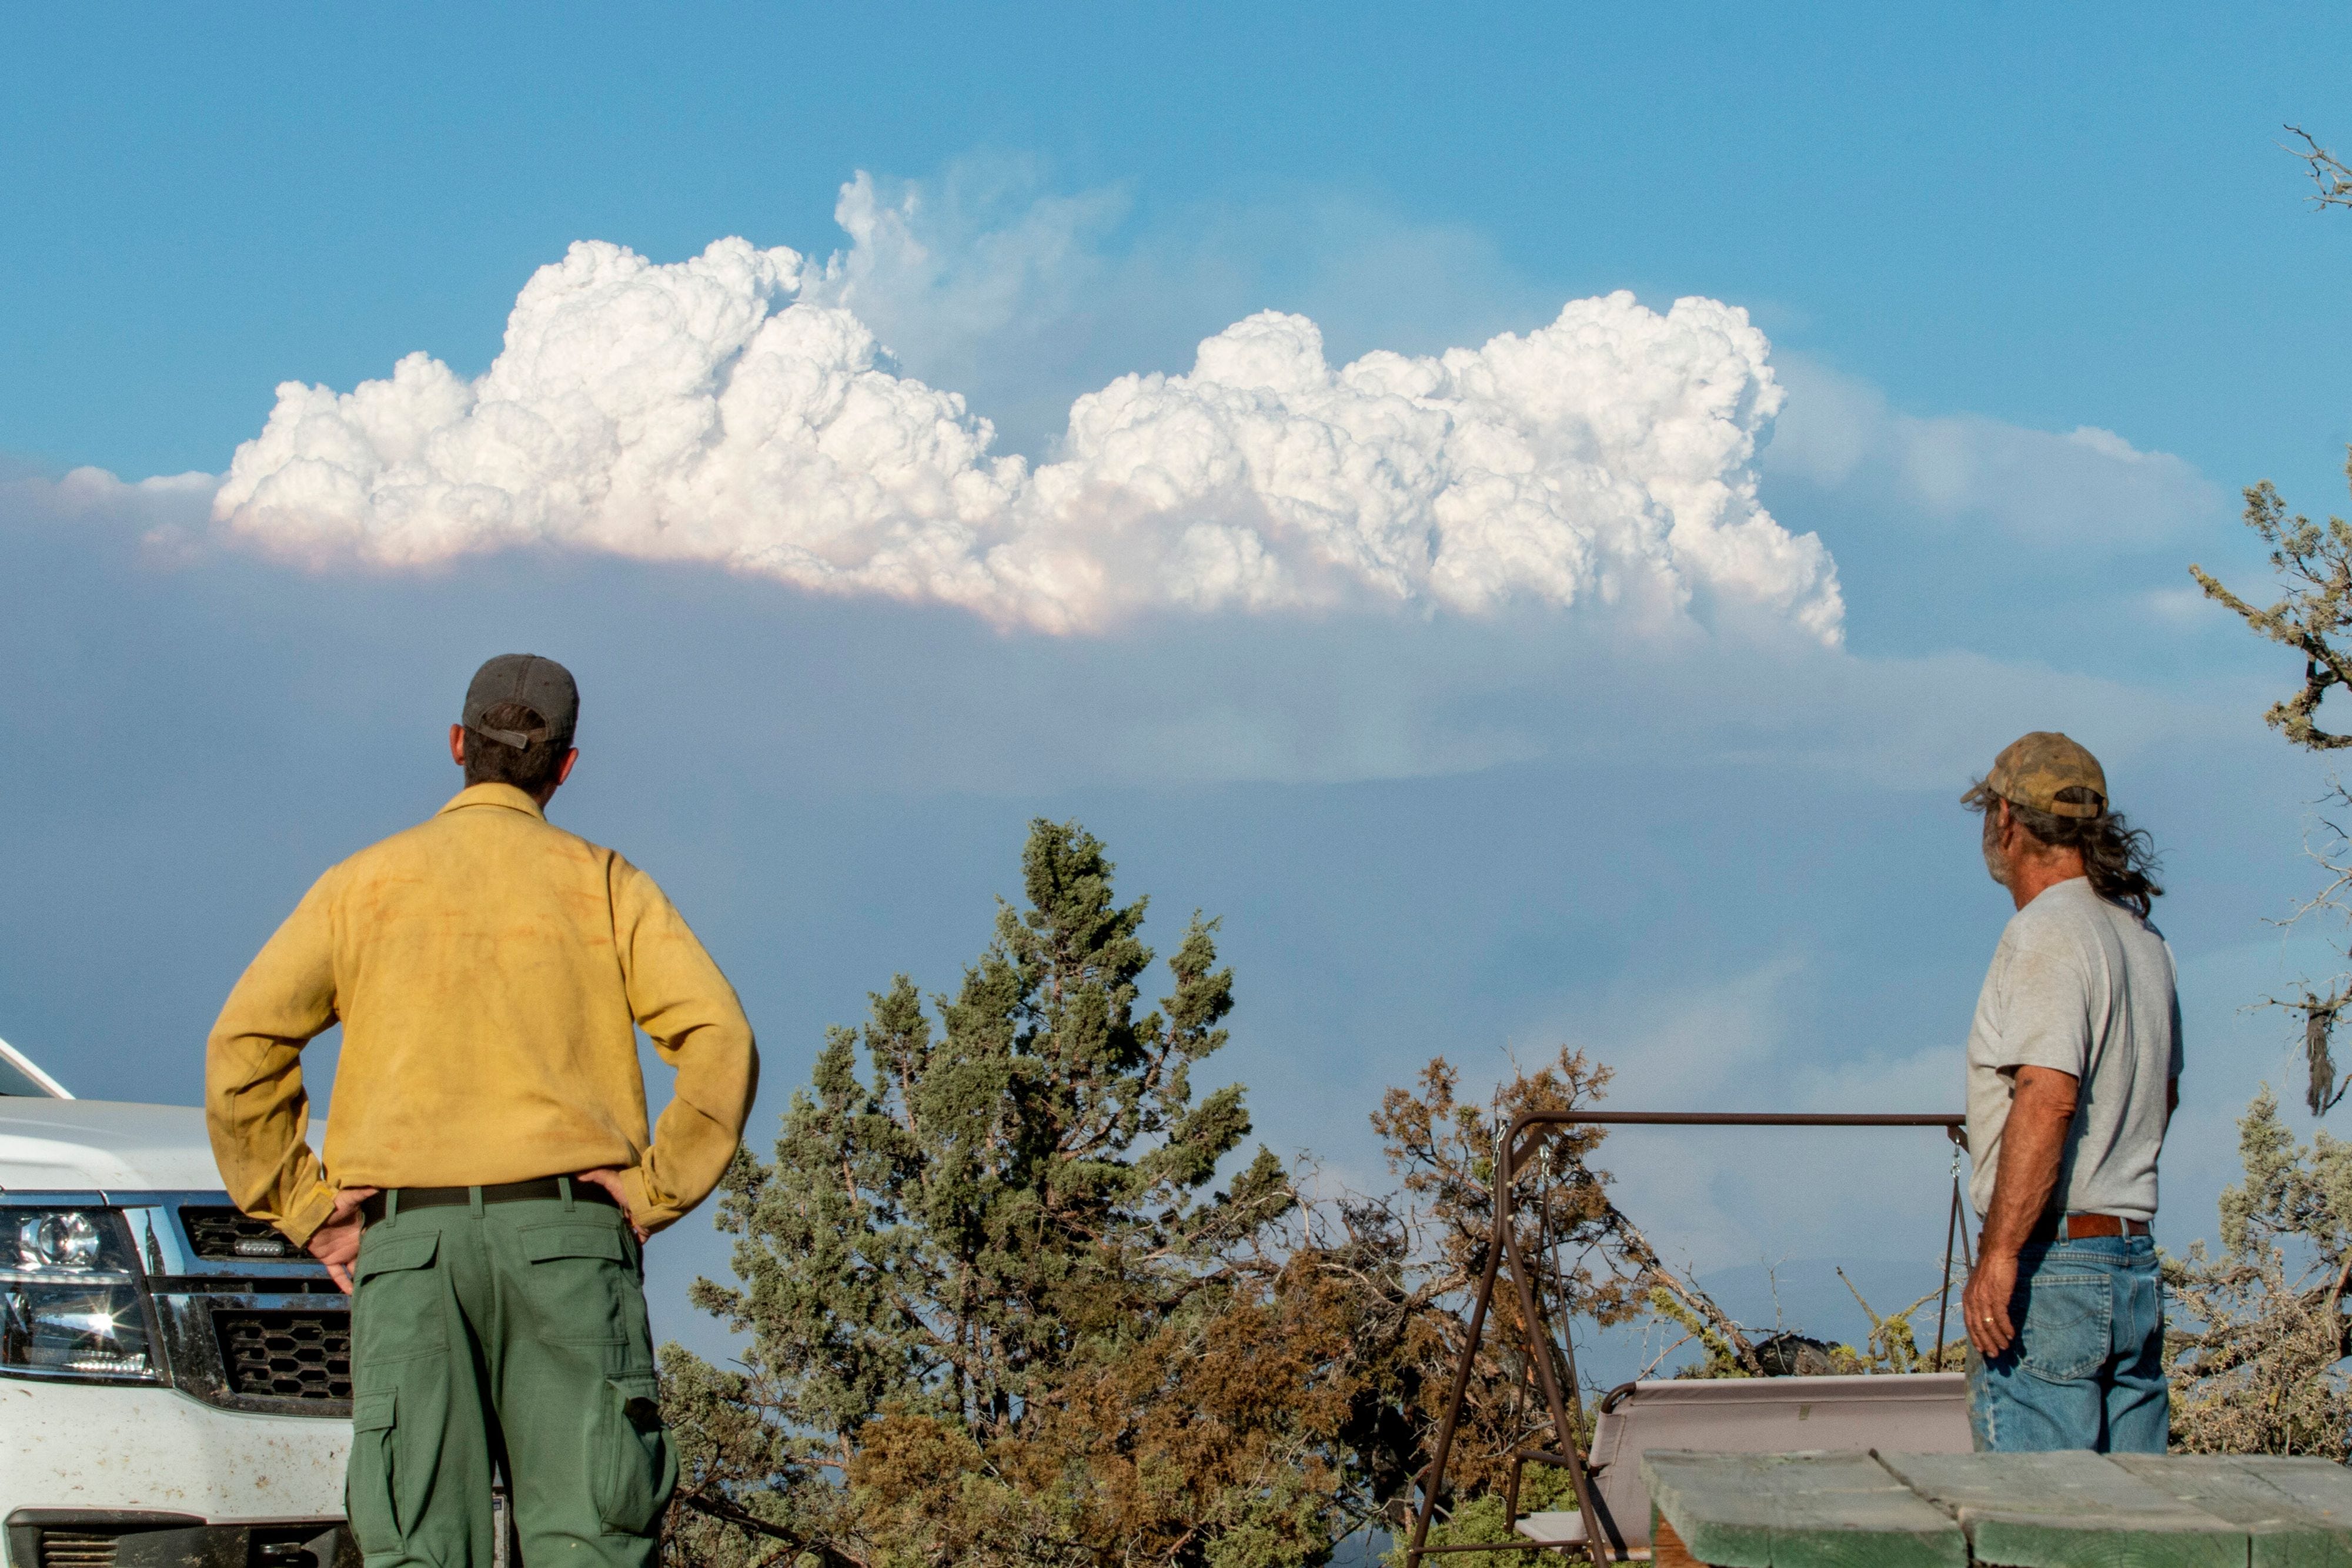 Fire Mitigation and Education Specialist Ryan Berlin (L) and  home owner Bob Dillon watch the Bootleg Fire smoke cloud from Dillon's home in Beatty, Oregon, on July 16, 2021. - The extreme drought-hit western United States braced for more wildfire destruction July 16, 2021 as efforts to contain a vast blaze scorching southern Oregon failed to progress, and dangerous dry lightning storms were forecast in California. The Bootleg Fire near Oregon's border with California grew overnight to 240,000 acres -- larger than New York City, and by far the biggest active blaze in the US -- while remaining just seven percent contained.